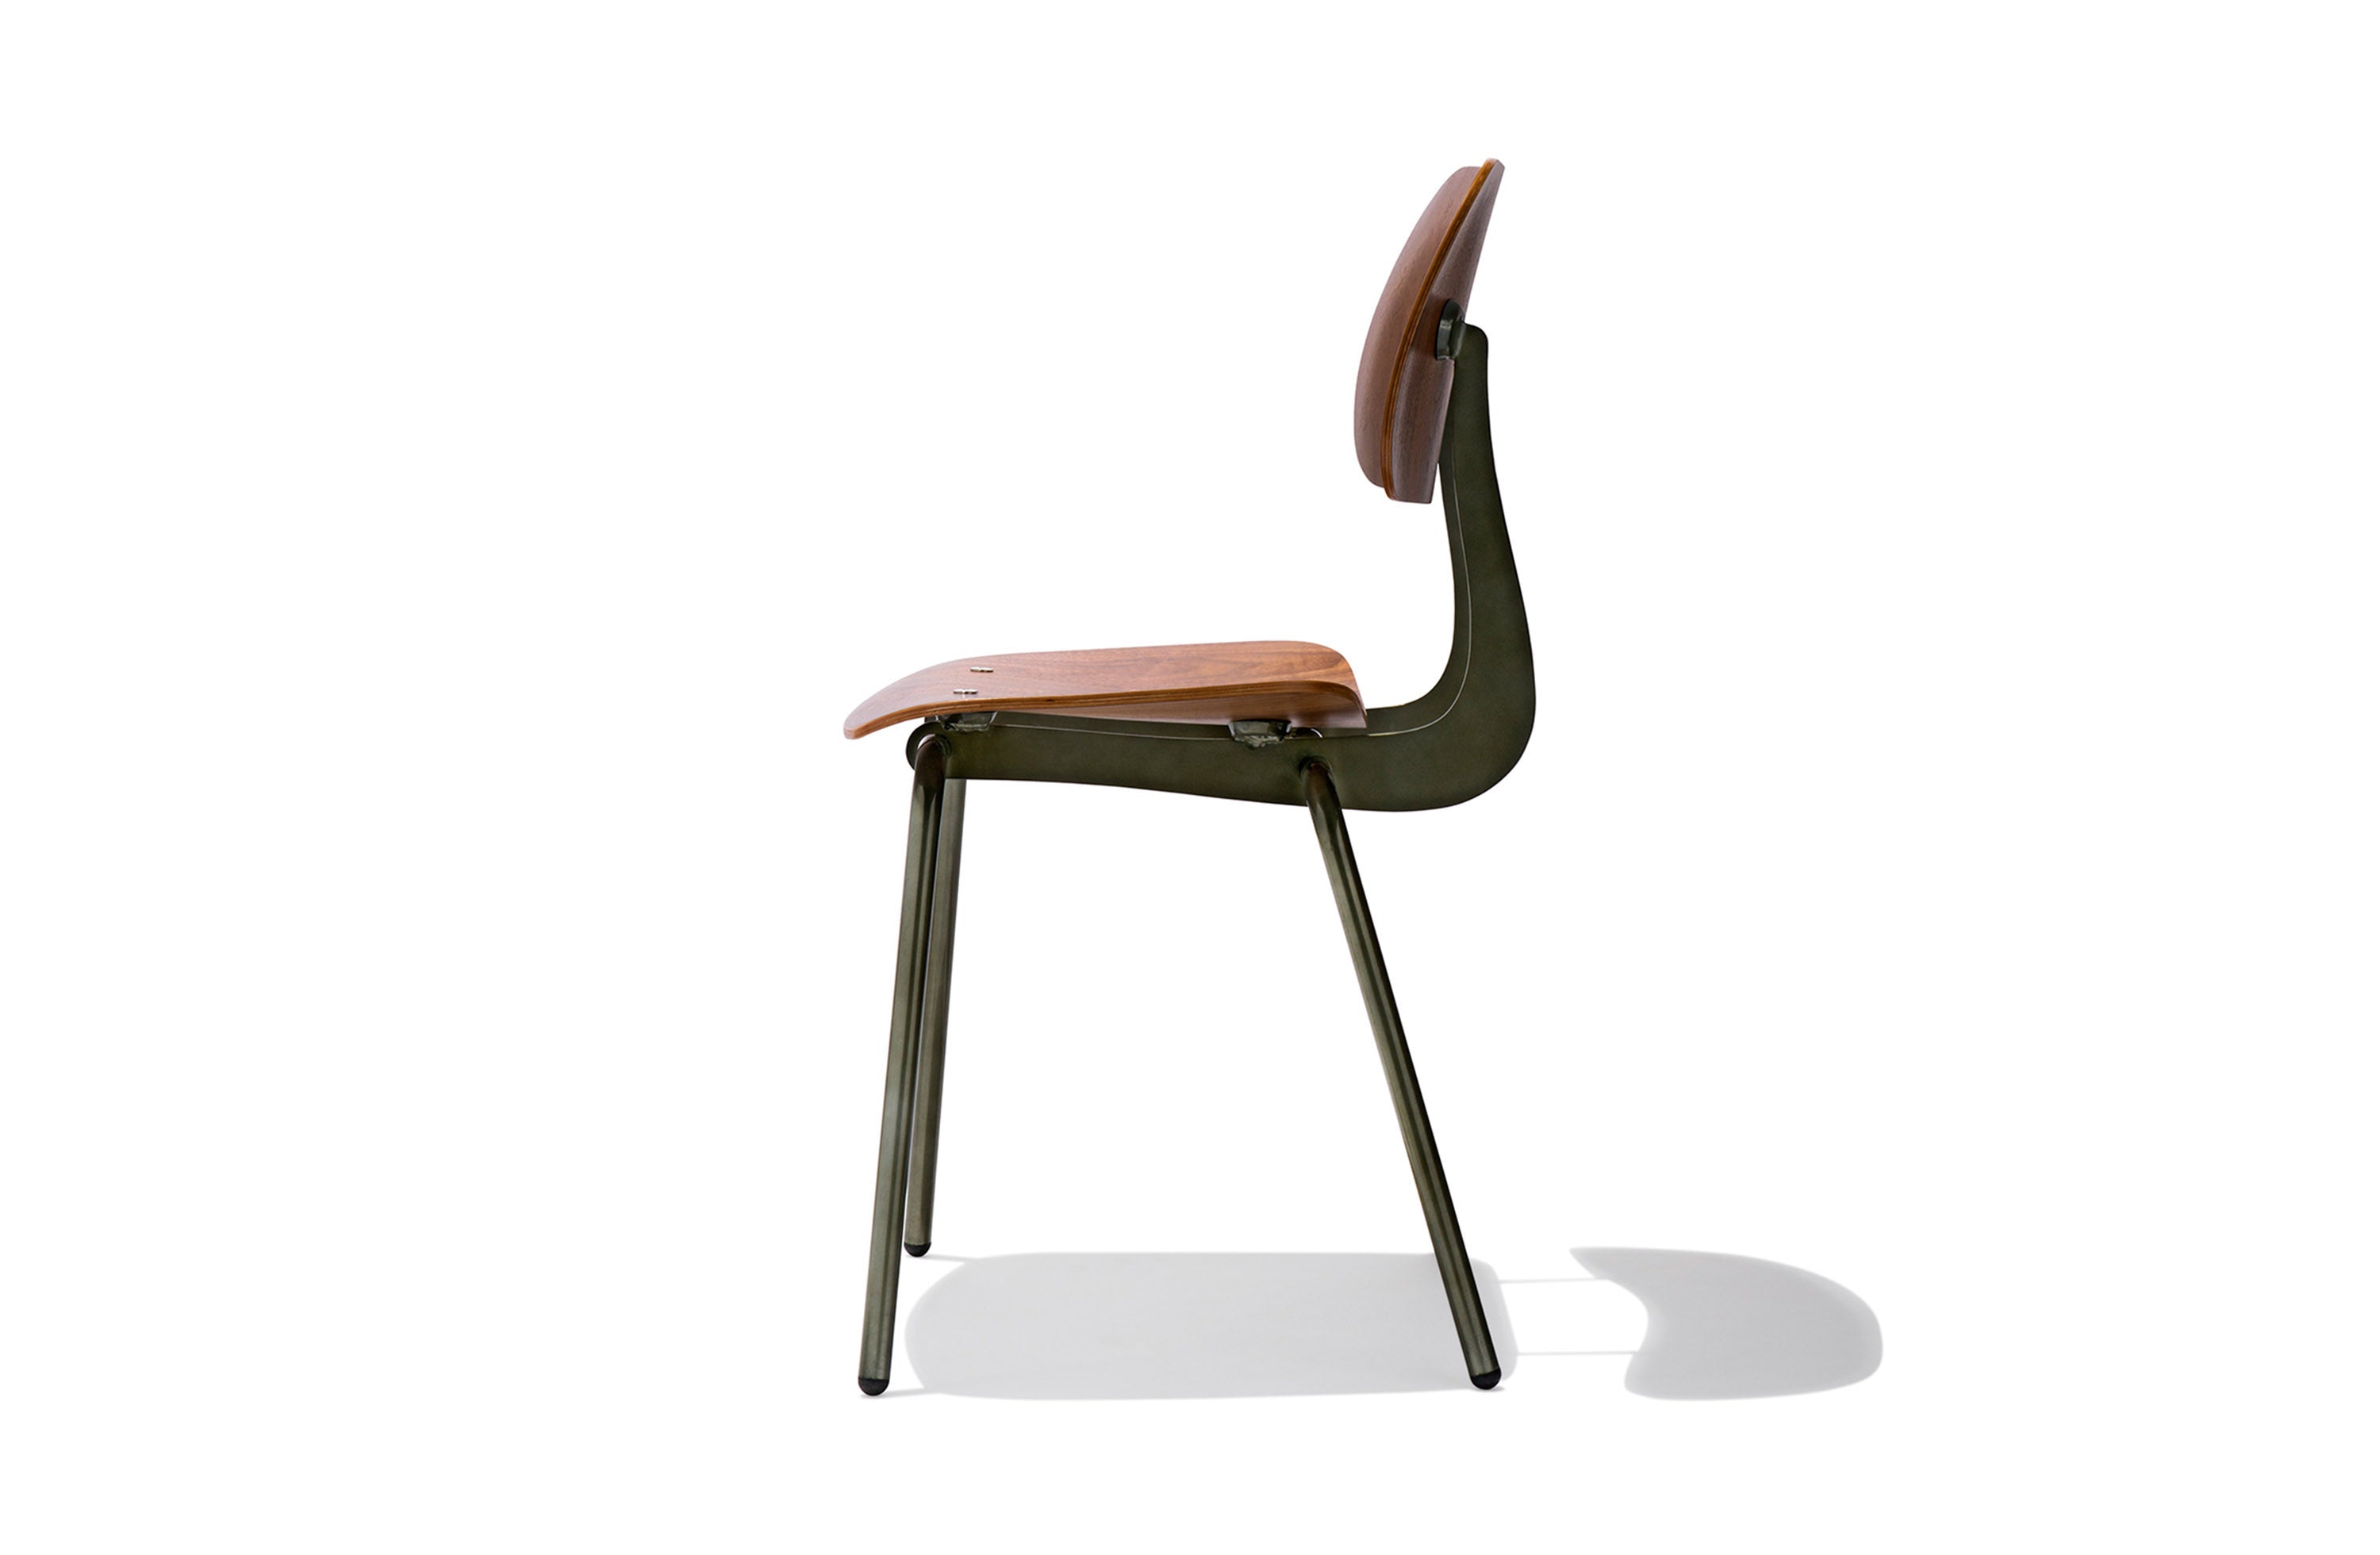 Circuit Dining Chair